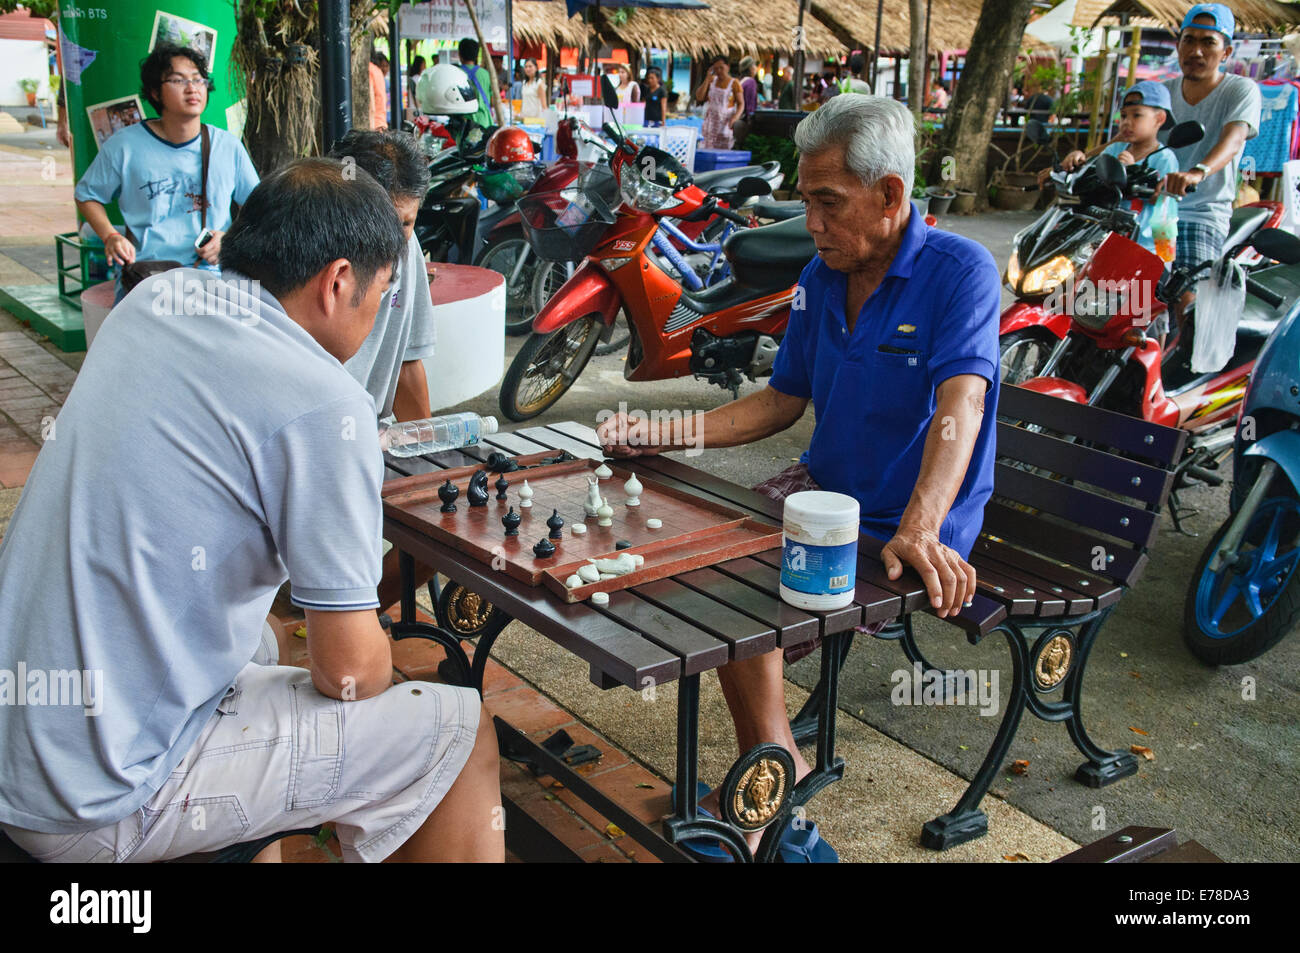 Elderly Thai Meet Friend And Play Local Chess Game Together, Shot In  Chantaburi Thailand. Stock Photo, Picture and Royalty Free Image. Image  83102854.